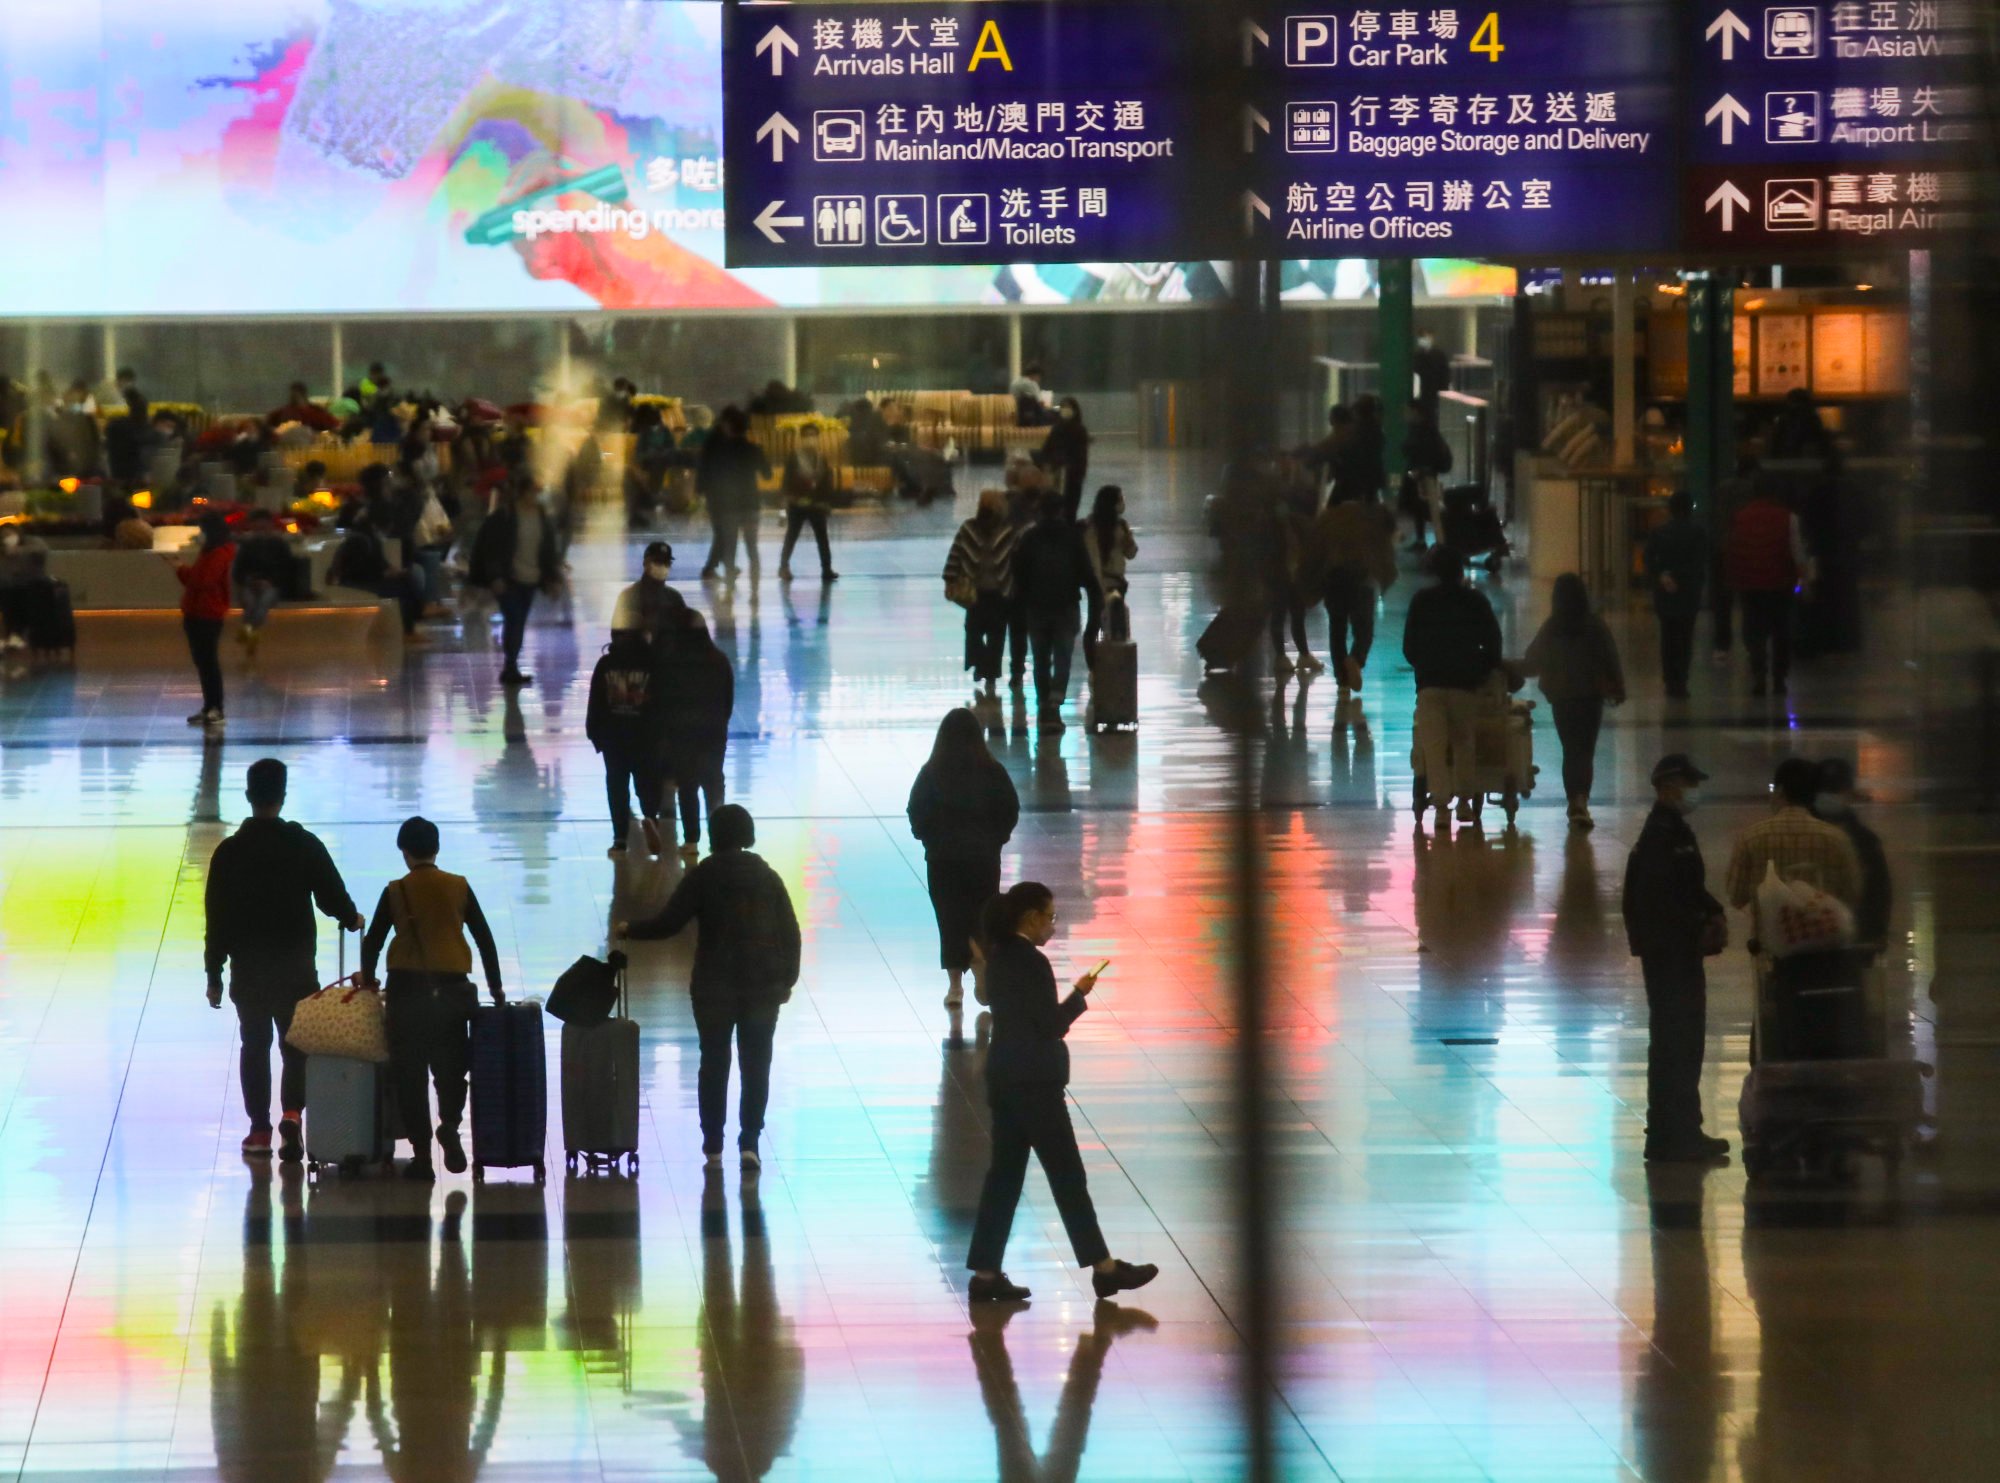 International flights have resumed in Hong Kong after the easing of nearly three years of lockdowns, social distancing and travel restrictions during the deadly Covid-19 pandemic. Photo: SCMP/Xiaomei Chen